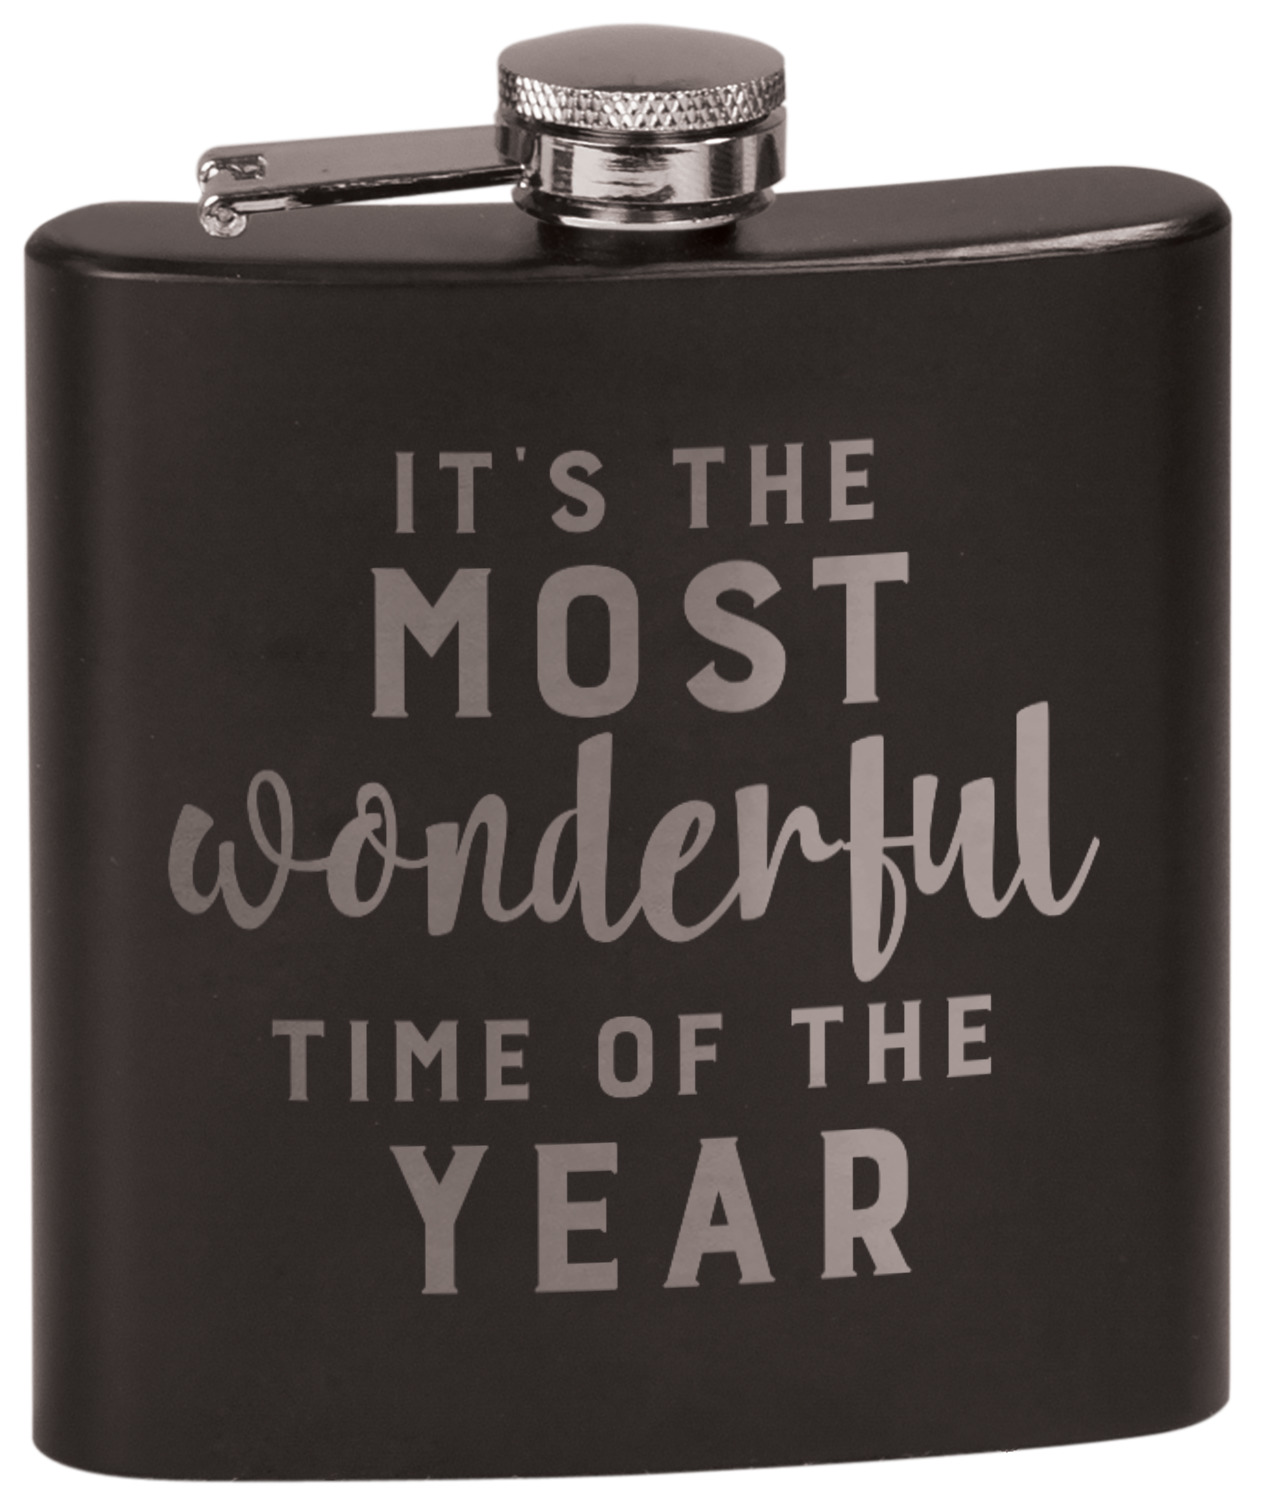 https://www.youcustomizeit.com/common/MAKE/1038049/Christmas-Quotes-and-Sayings-Black-Flask-Engraved-Front-2.jpg?lm=1633985312